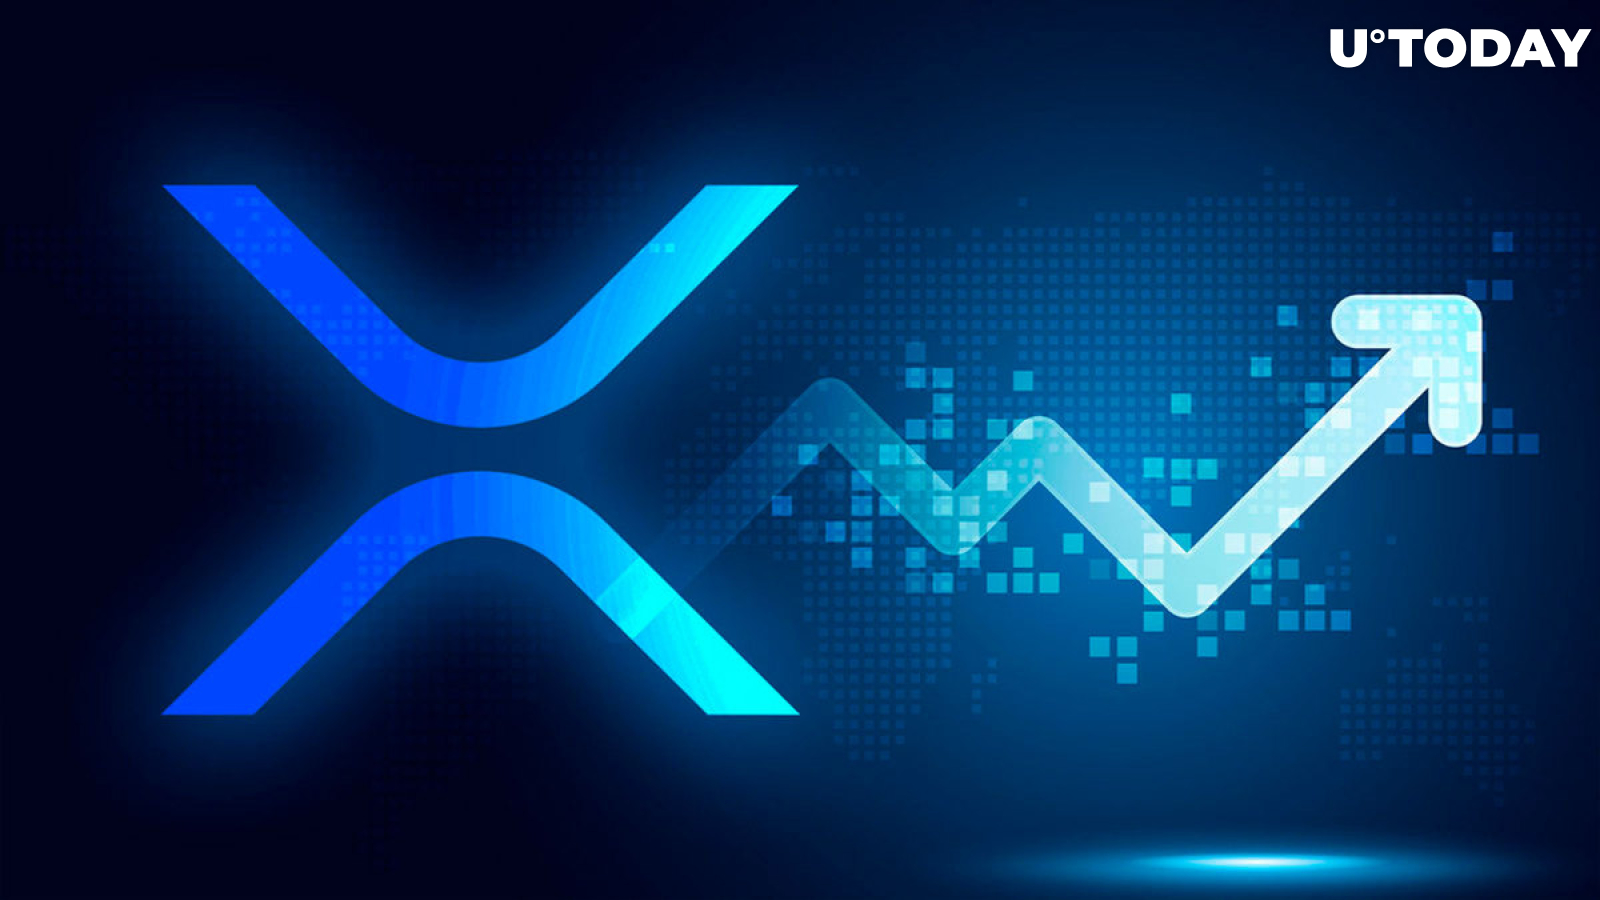 XRP Welcomes Massive Capital Inflow, Here's Price Reaction